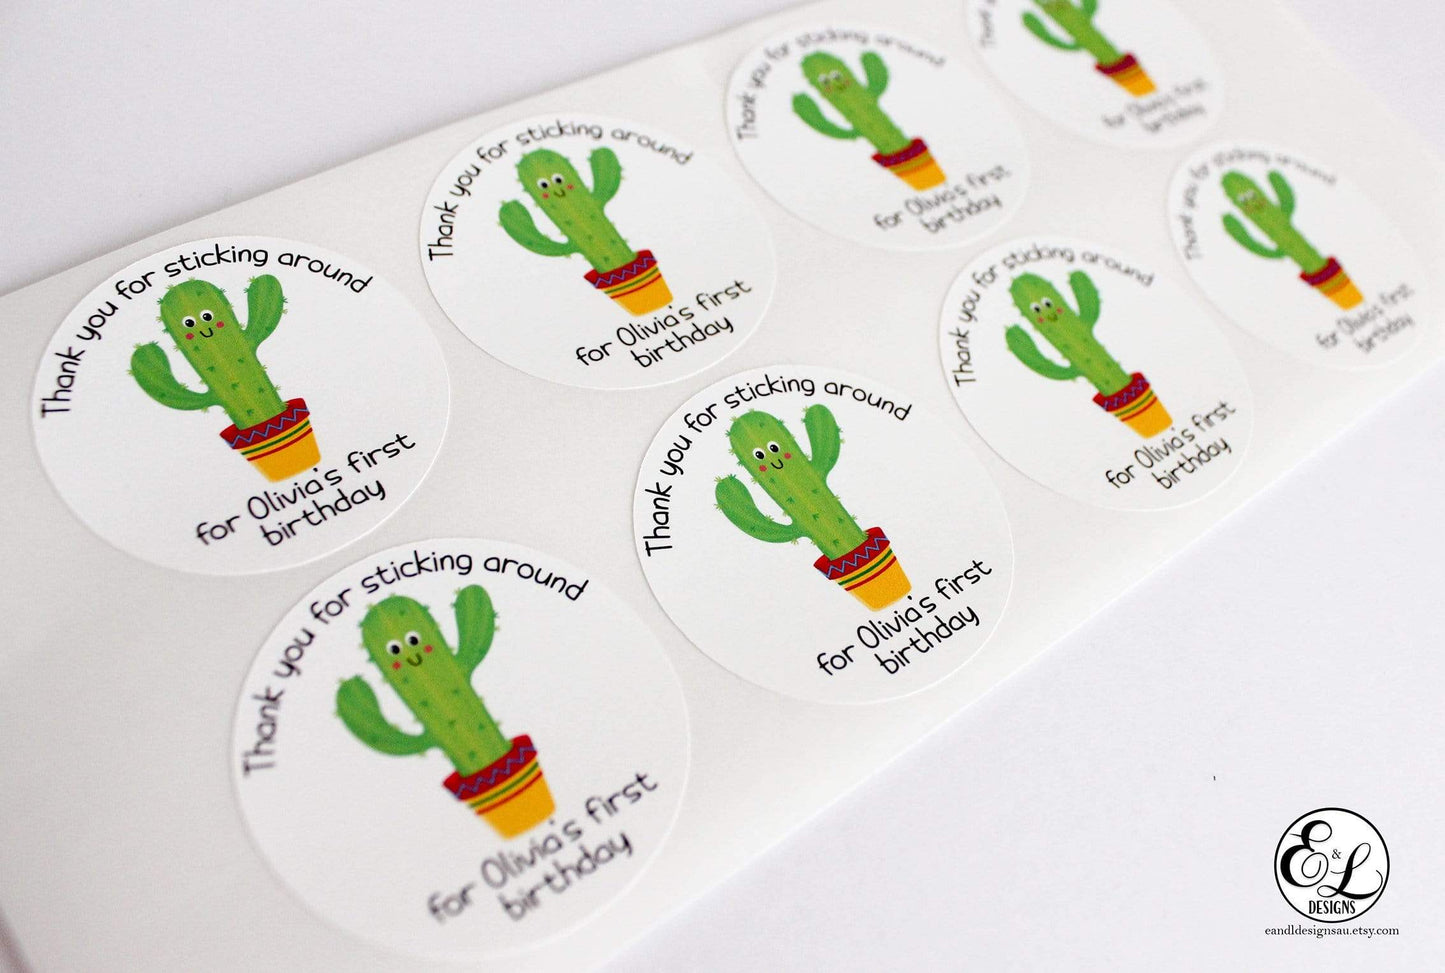 E&L Designs Personalised Thanks For Sticking Around Cactus Stickers - Mexican, Cactus Theme